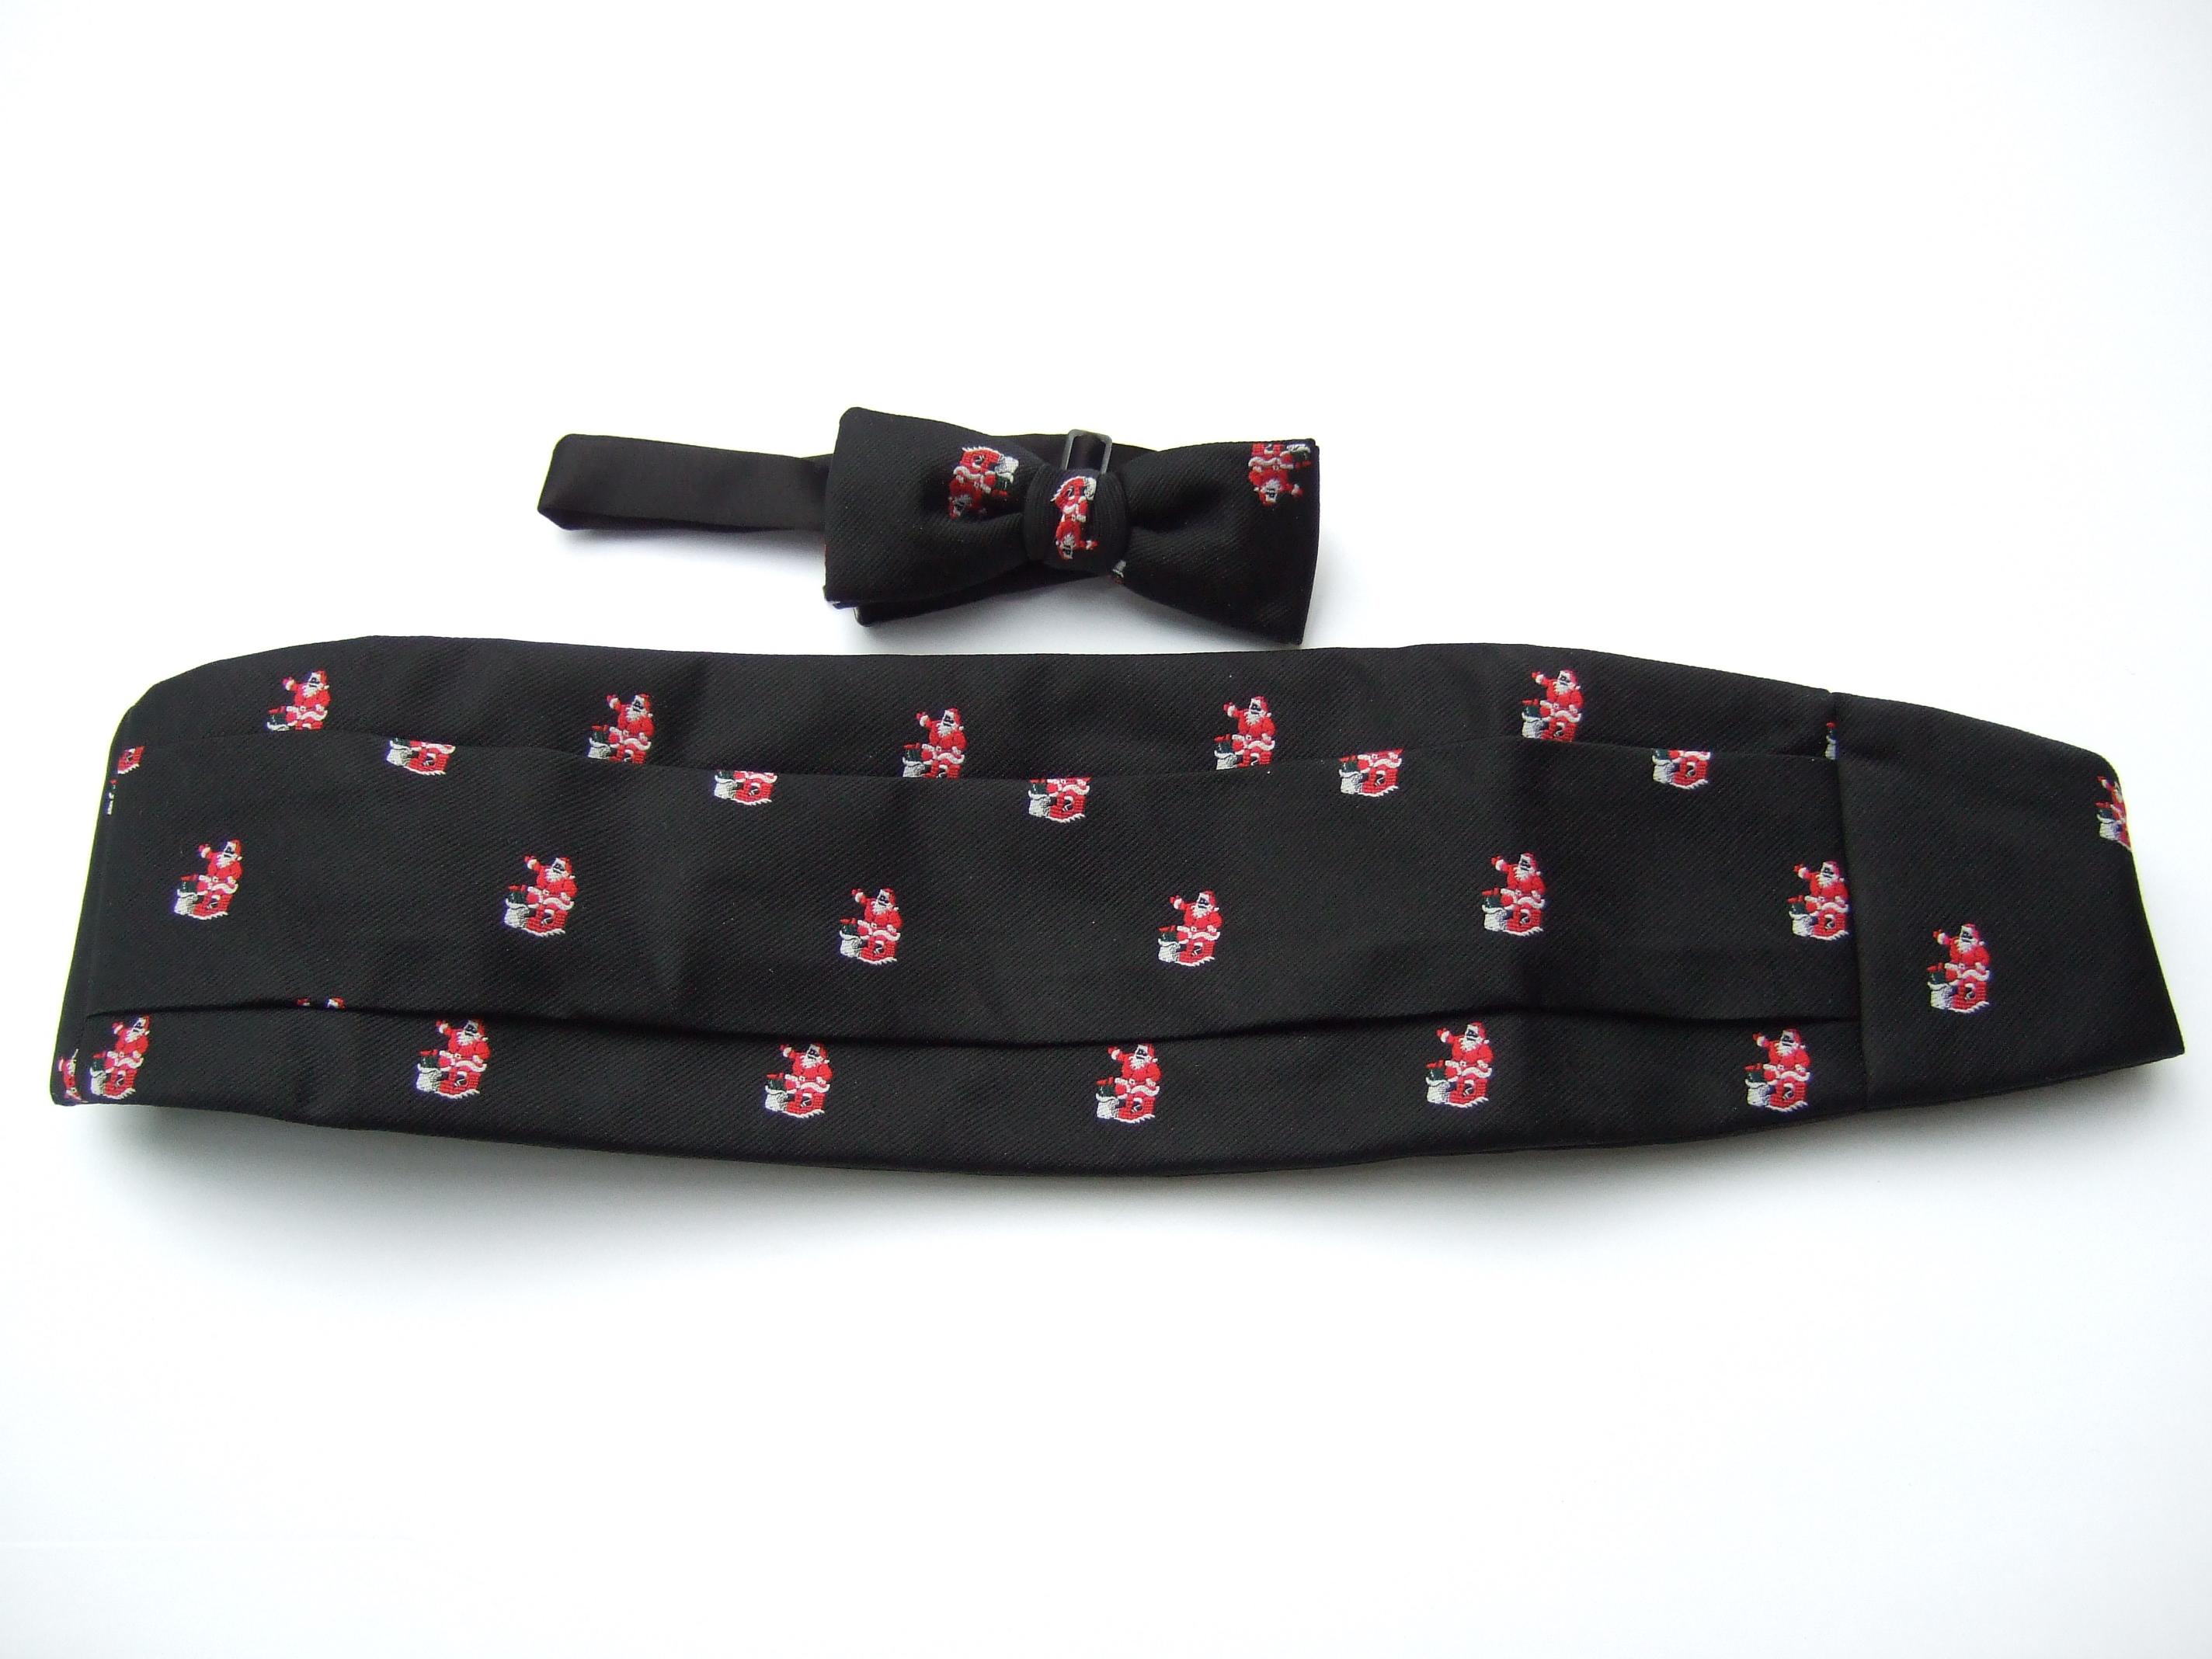 Whimsical Santa Claus Themed Cummerbund Bow Tie Set c 1980s In Good Condition For Sale In University City, MO